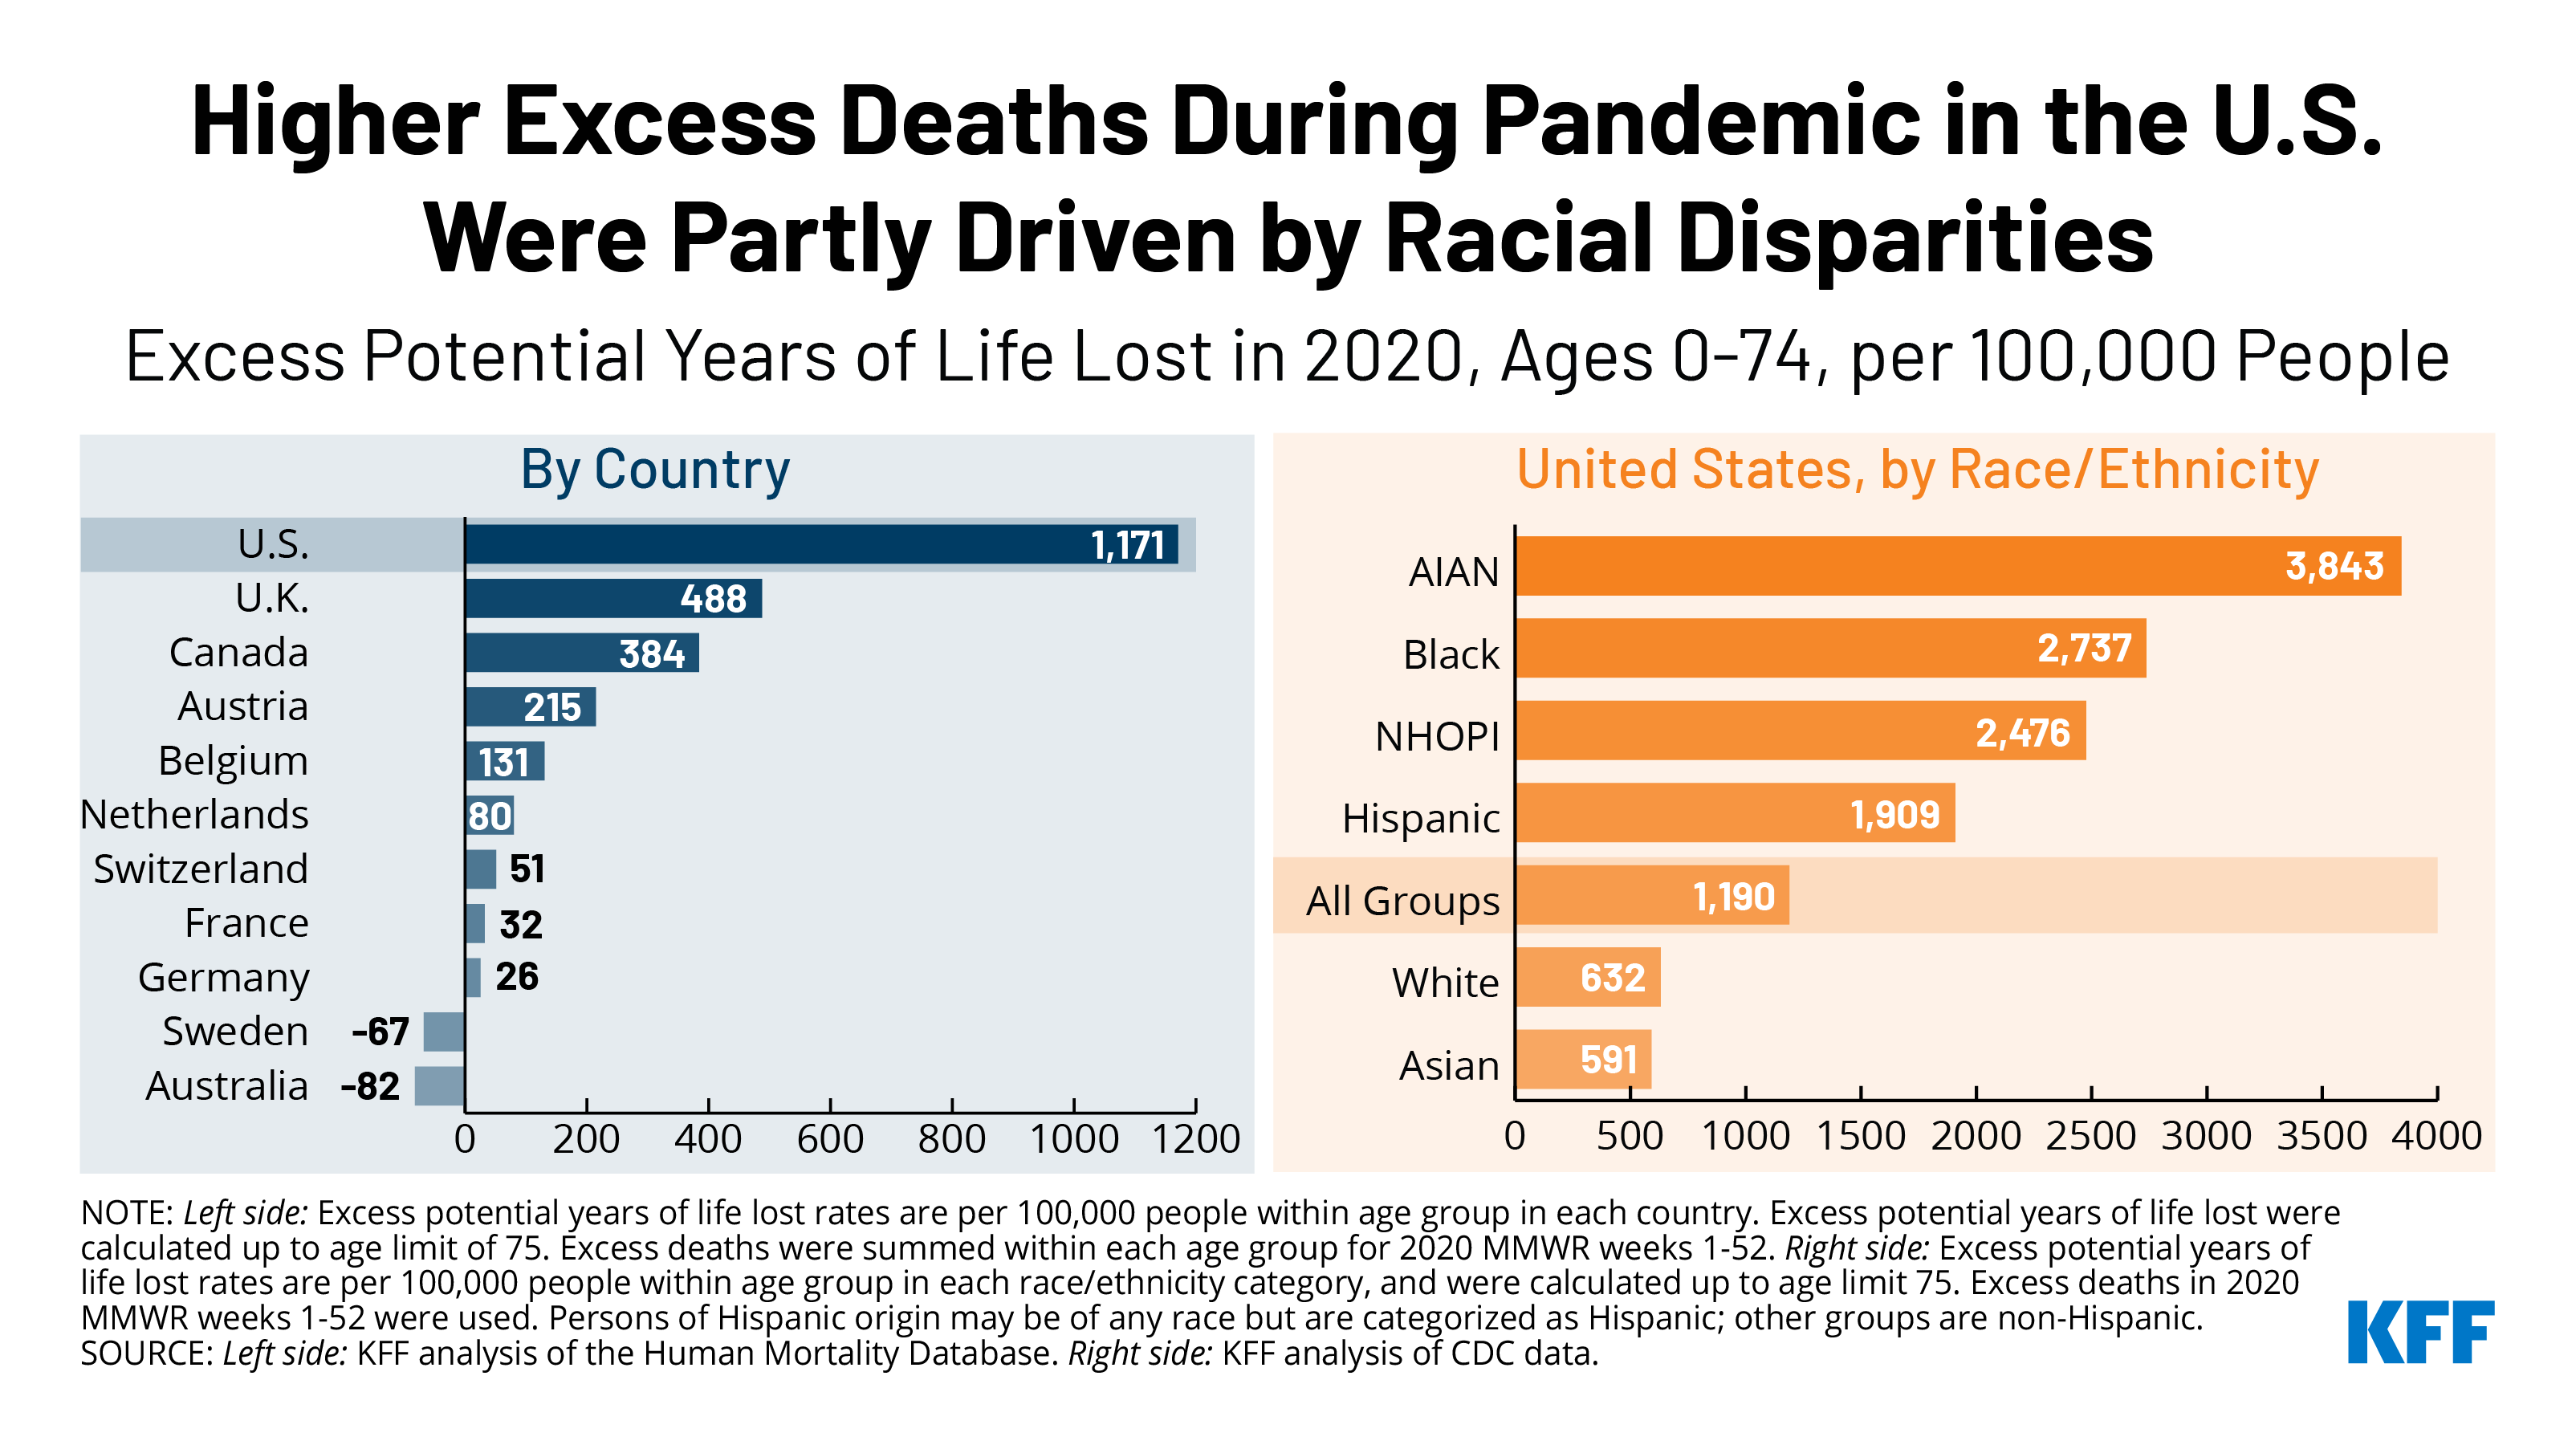 During Pandemic, Higher Premature Excess Deaths in U.S. Compared to